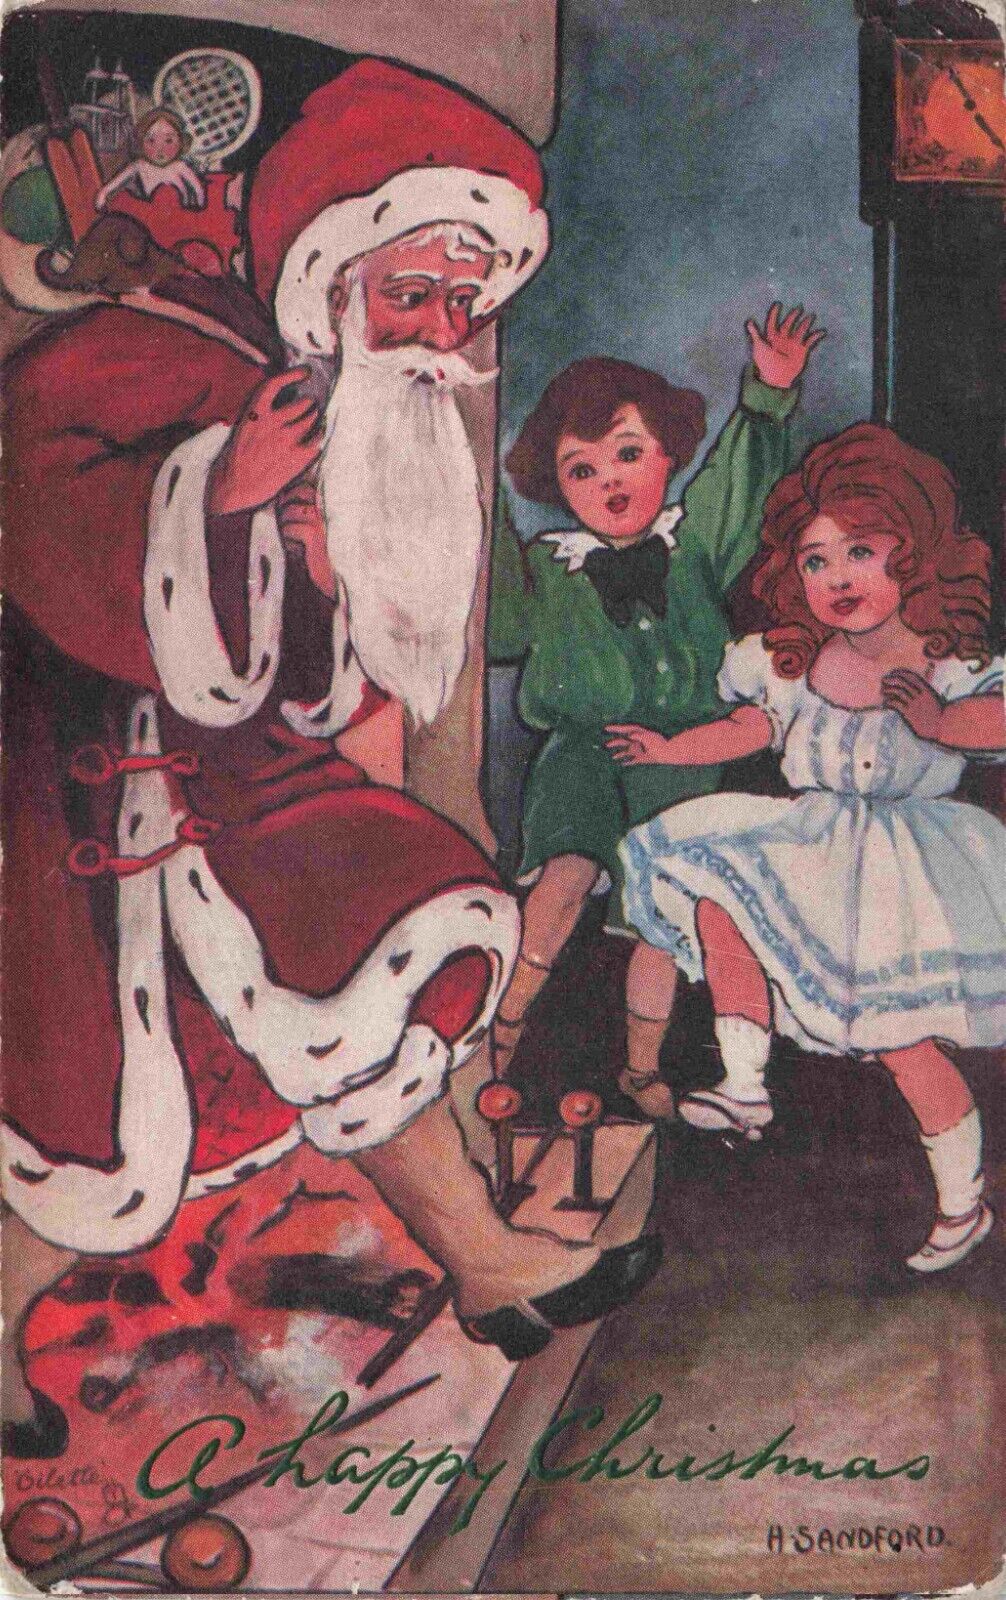 Santa Claus Steps Out of Chimney to Children by Sandford Tucks Oilette Postcard